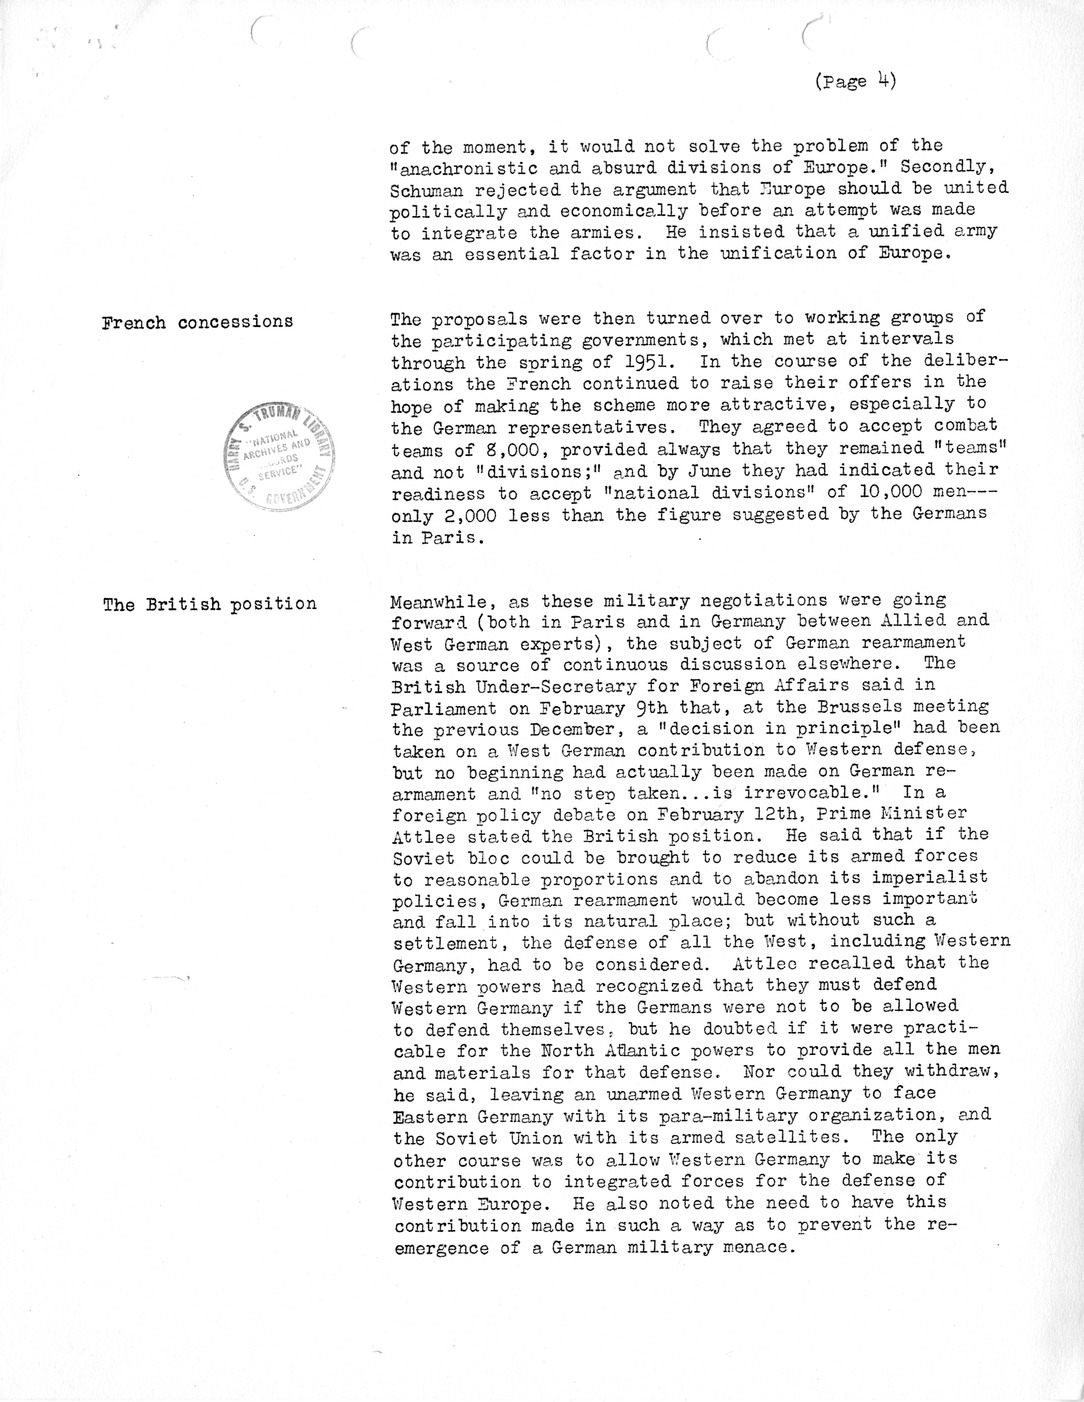 SYNOPSIS I, Miscellaneous Developments in Europe, January-June 1951